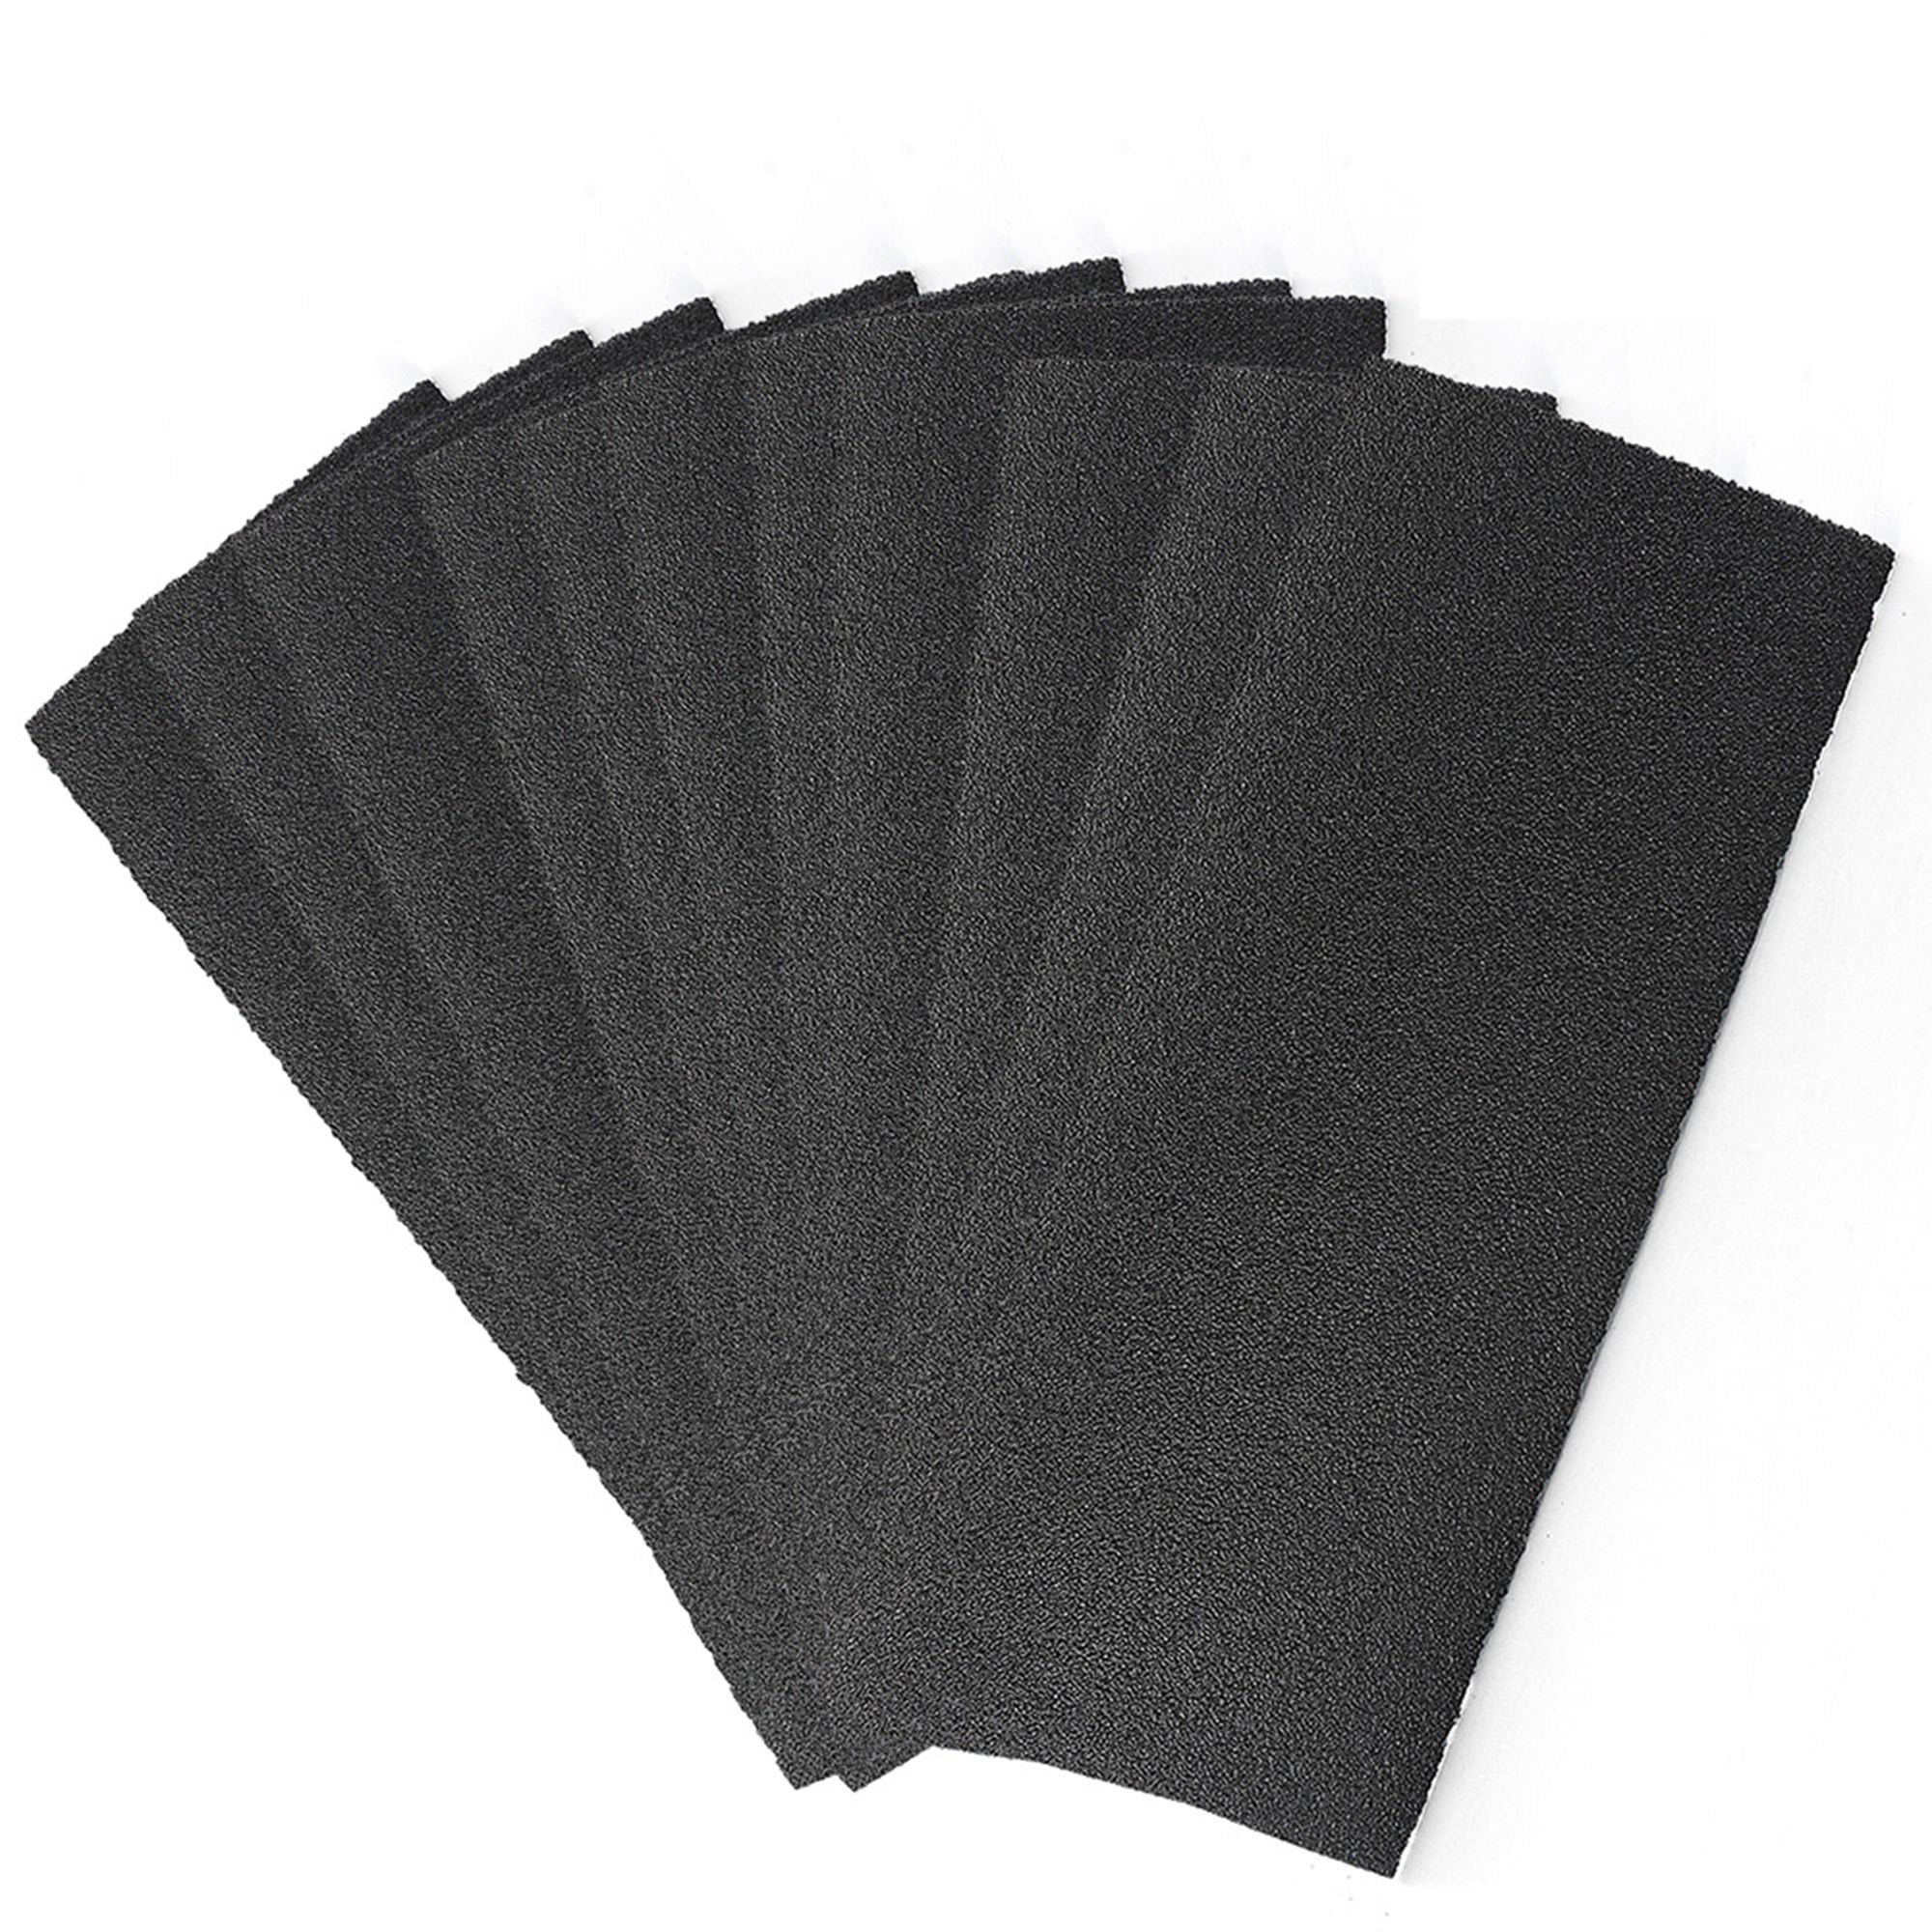 Hot 12Pcs 9X3.6'' Grit Orbital Paper Assorted Wet or dry Sandpaper 400 to 150 